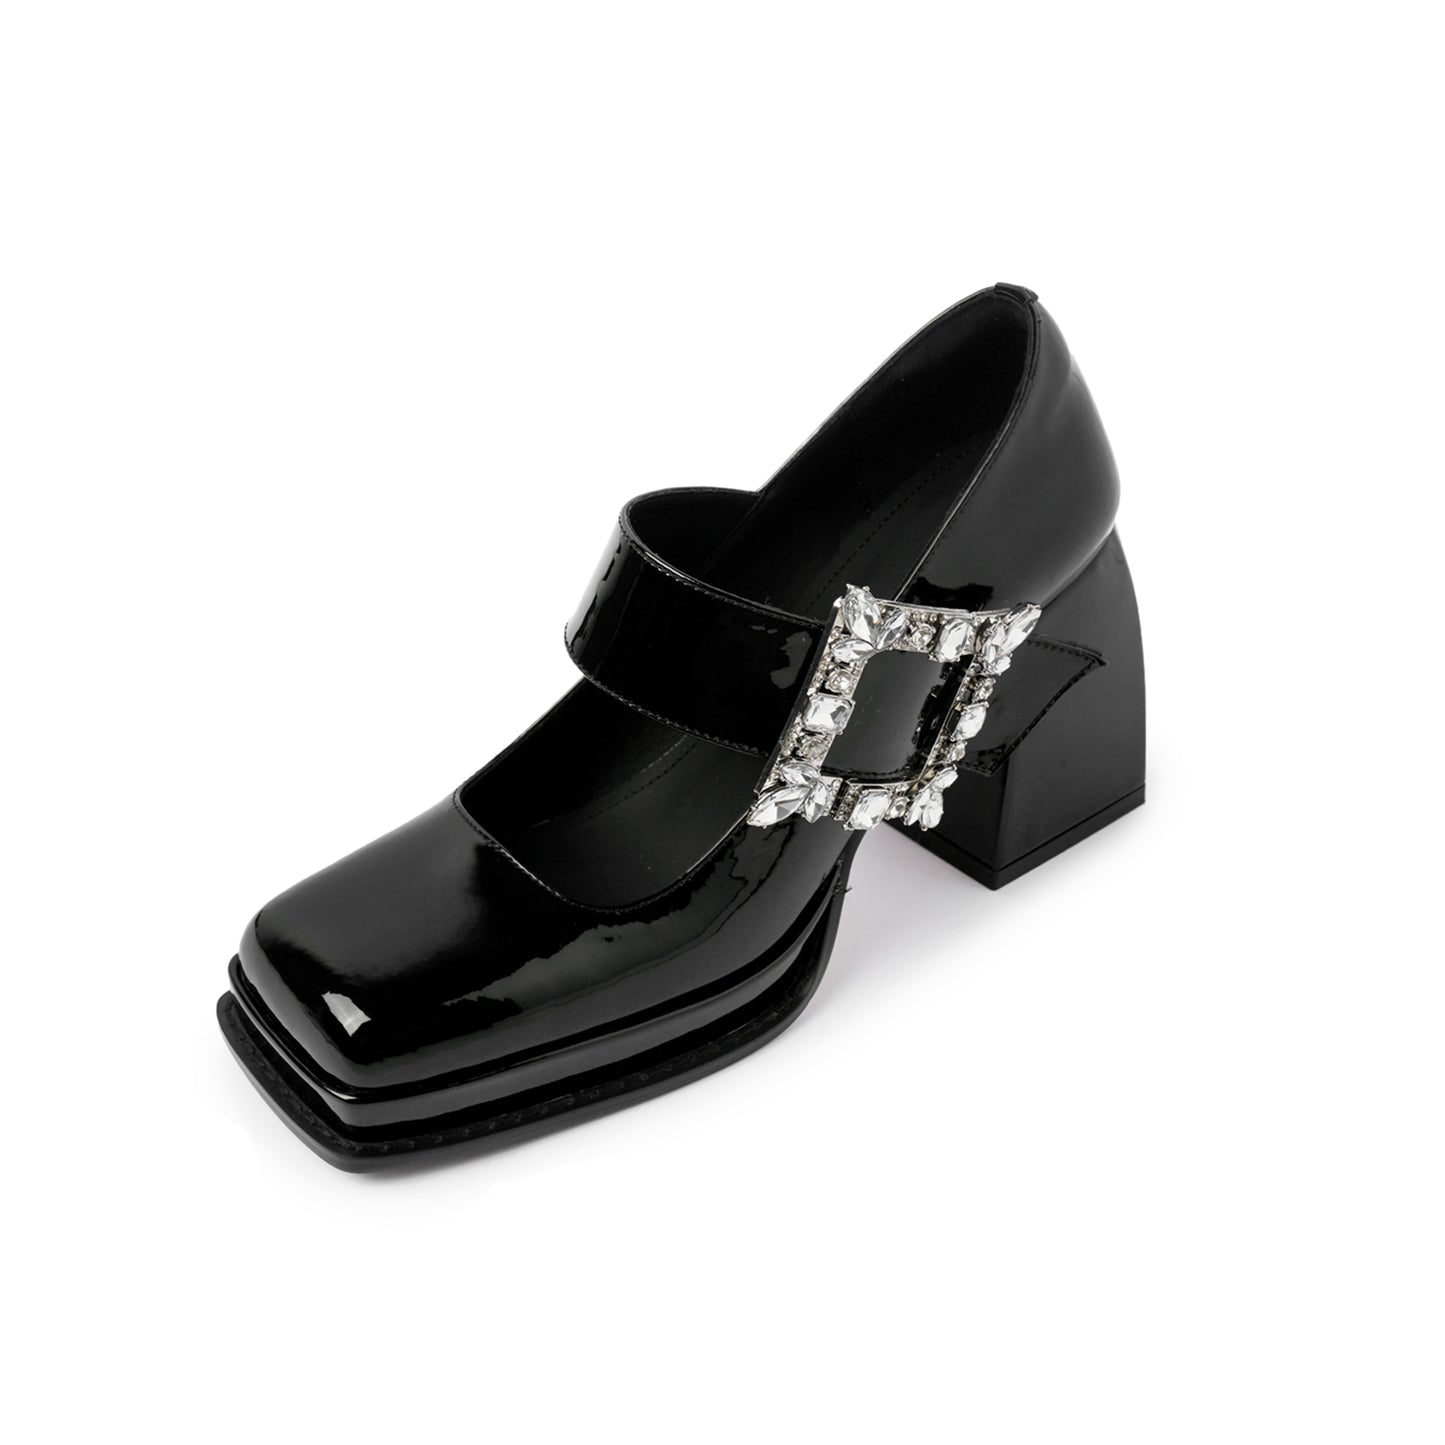 TinaCus Women's Square Toe Patent Leather Handmade Platform Delicate Buckle High Chunky Heel Chic Mary Jane Shoes